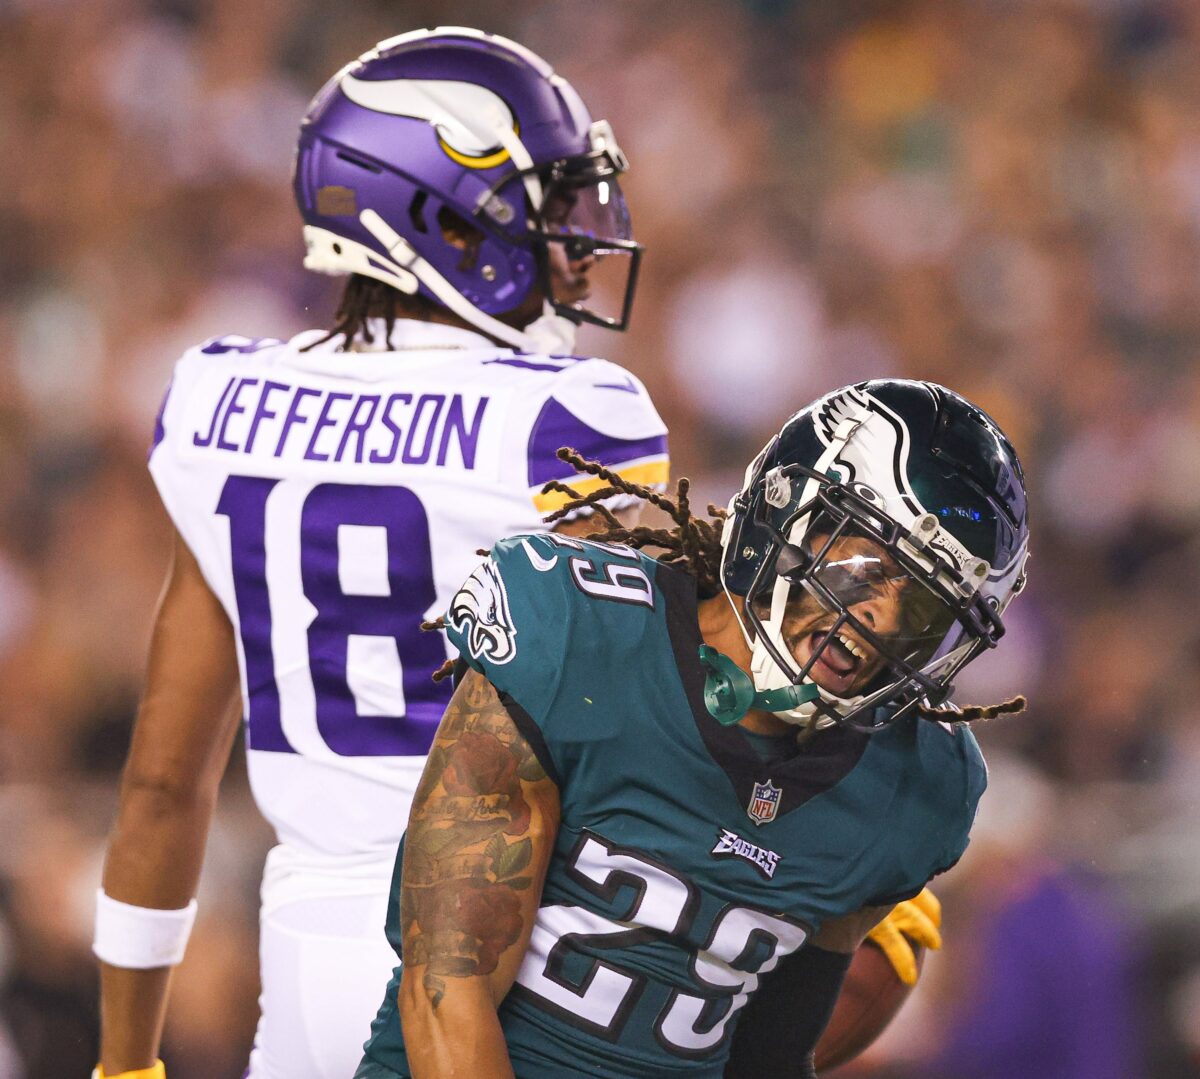 Eagles vs. Vikings: 7 stats to know for Thursday night matchup